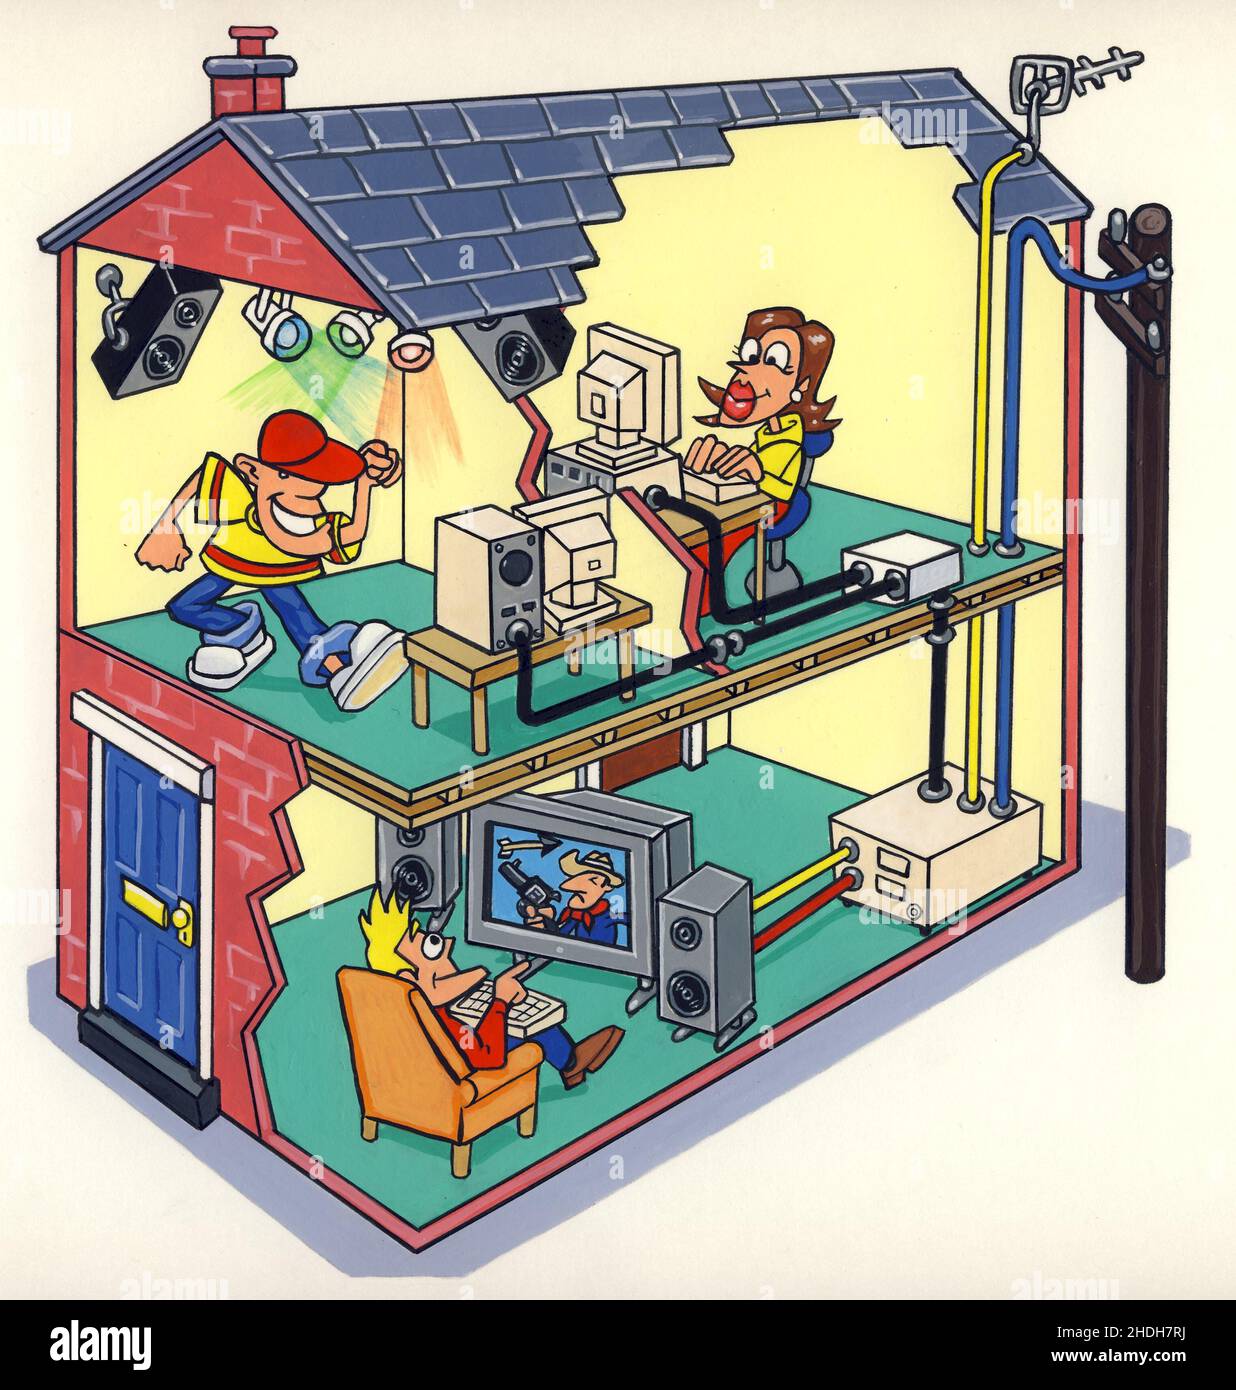 Simplified exploded diagram art illustration showing the layers of a typical UK house, bedrooms and living room, and the wiring for electrical devices Stock Photo